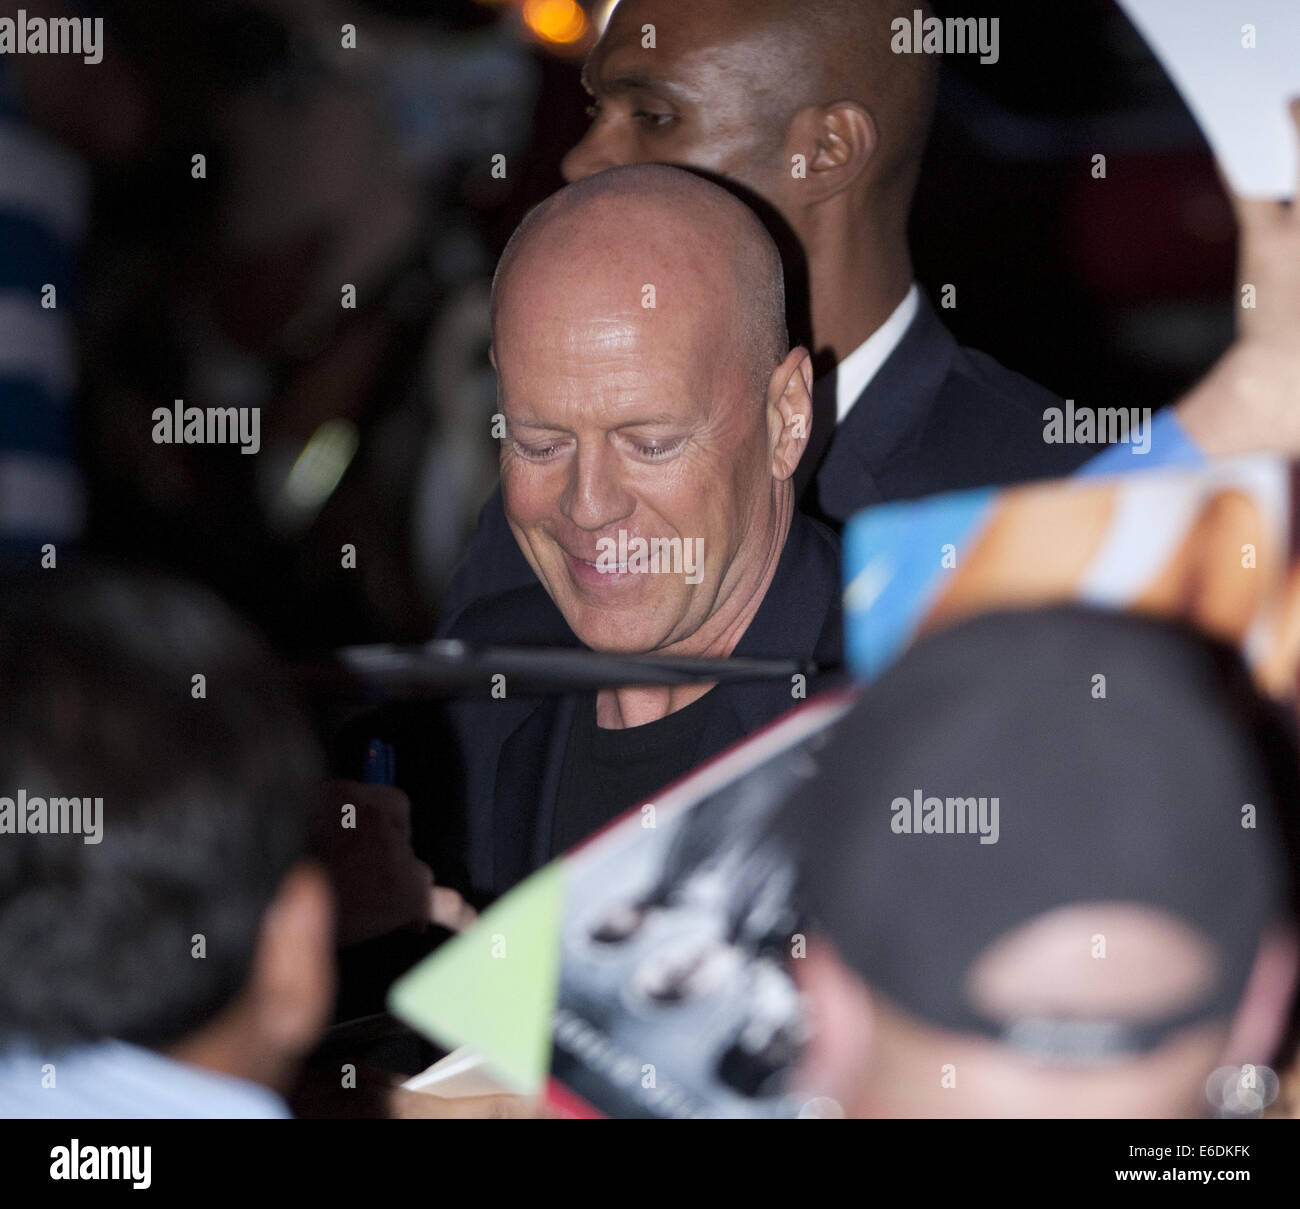 Aug. 19, 2014 - Hollywood, California, U.S - American actor Bruce Willis arrives at the 'Sin City: A Dame To Kill For' Hollywood Premiere at the TCL Chinese Theatre on Monday August 19, 2014.  The actor greeted fans, signing autographs and taking photos before making it onto the red carpet on Tuesday. (Credit Image: © David Bro/ZUMA Wire) Stock Photo